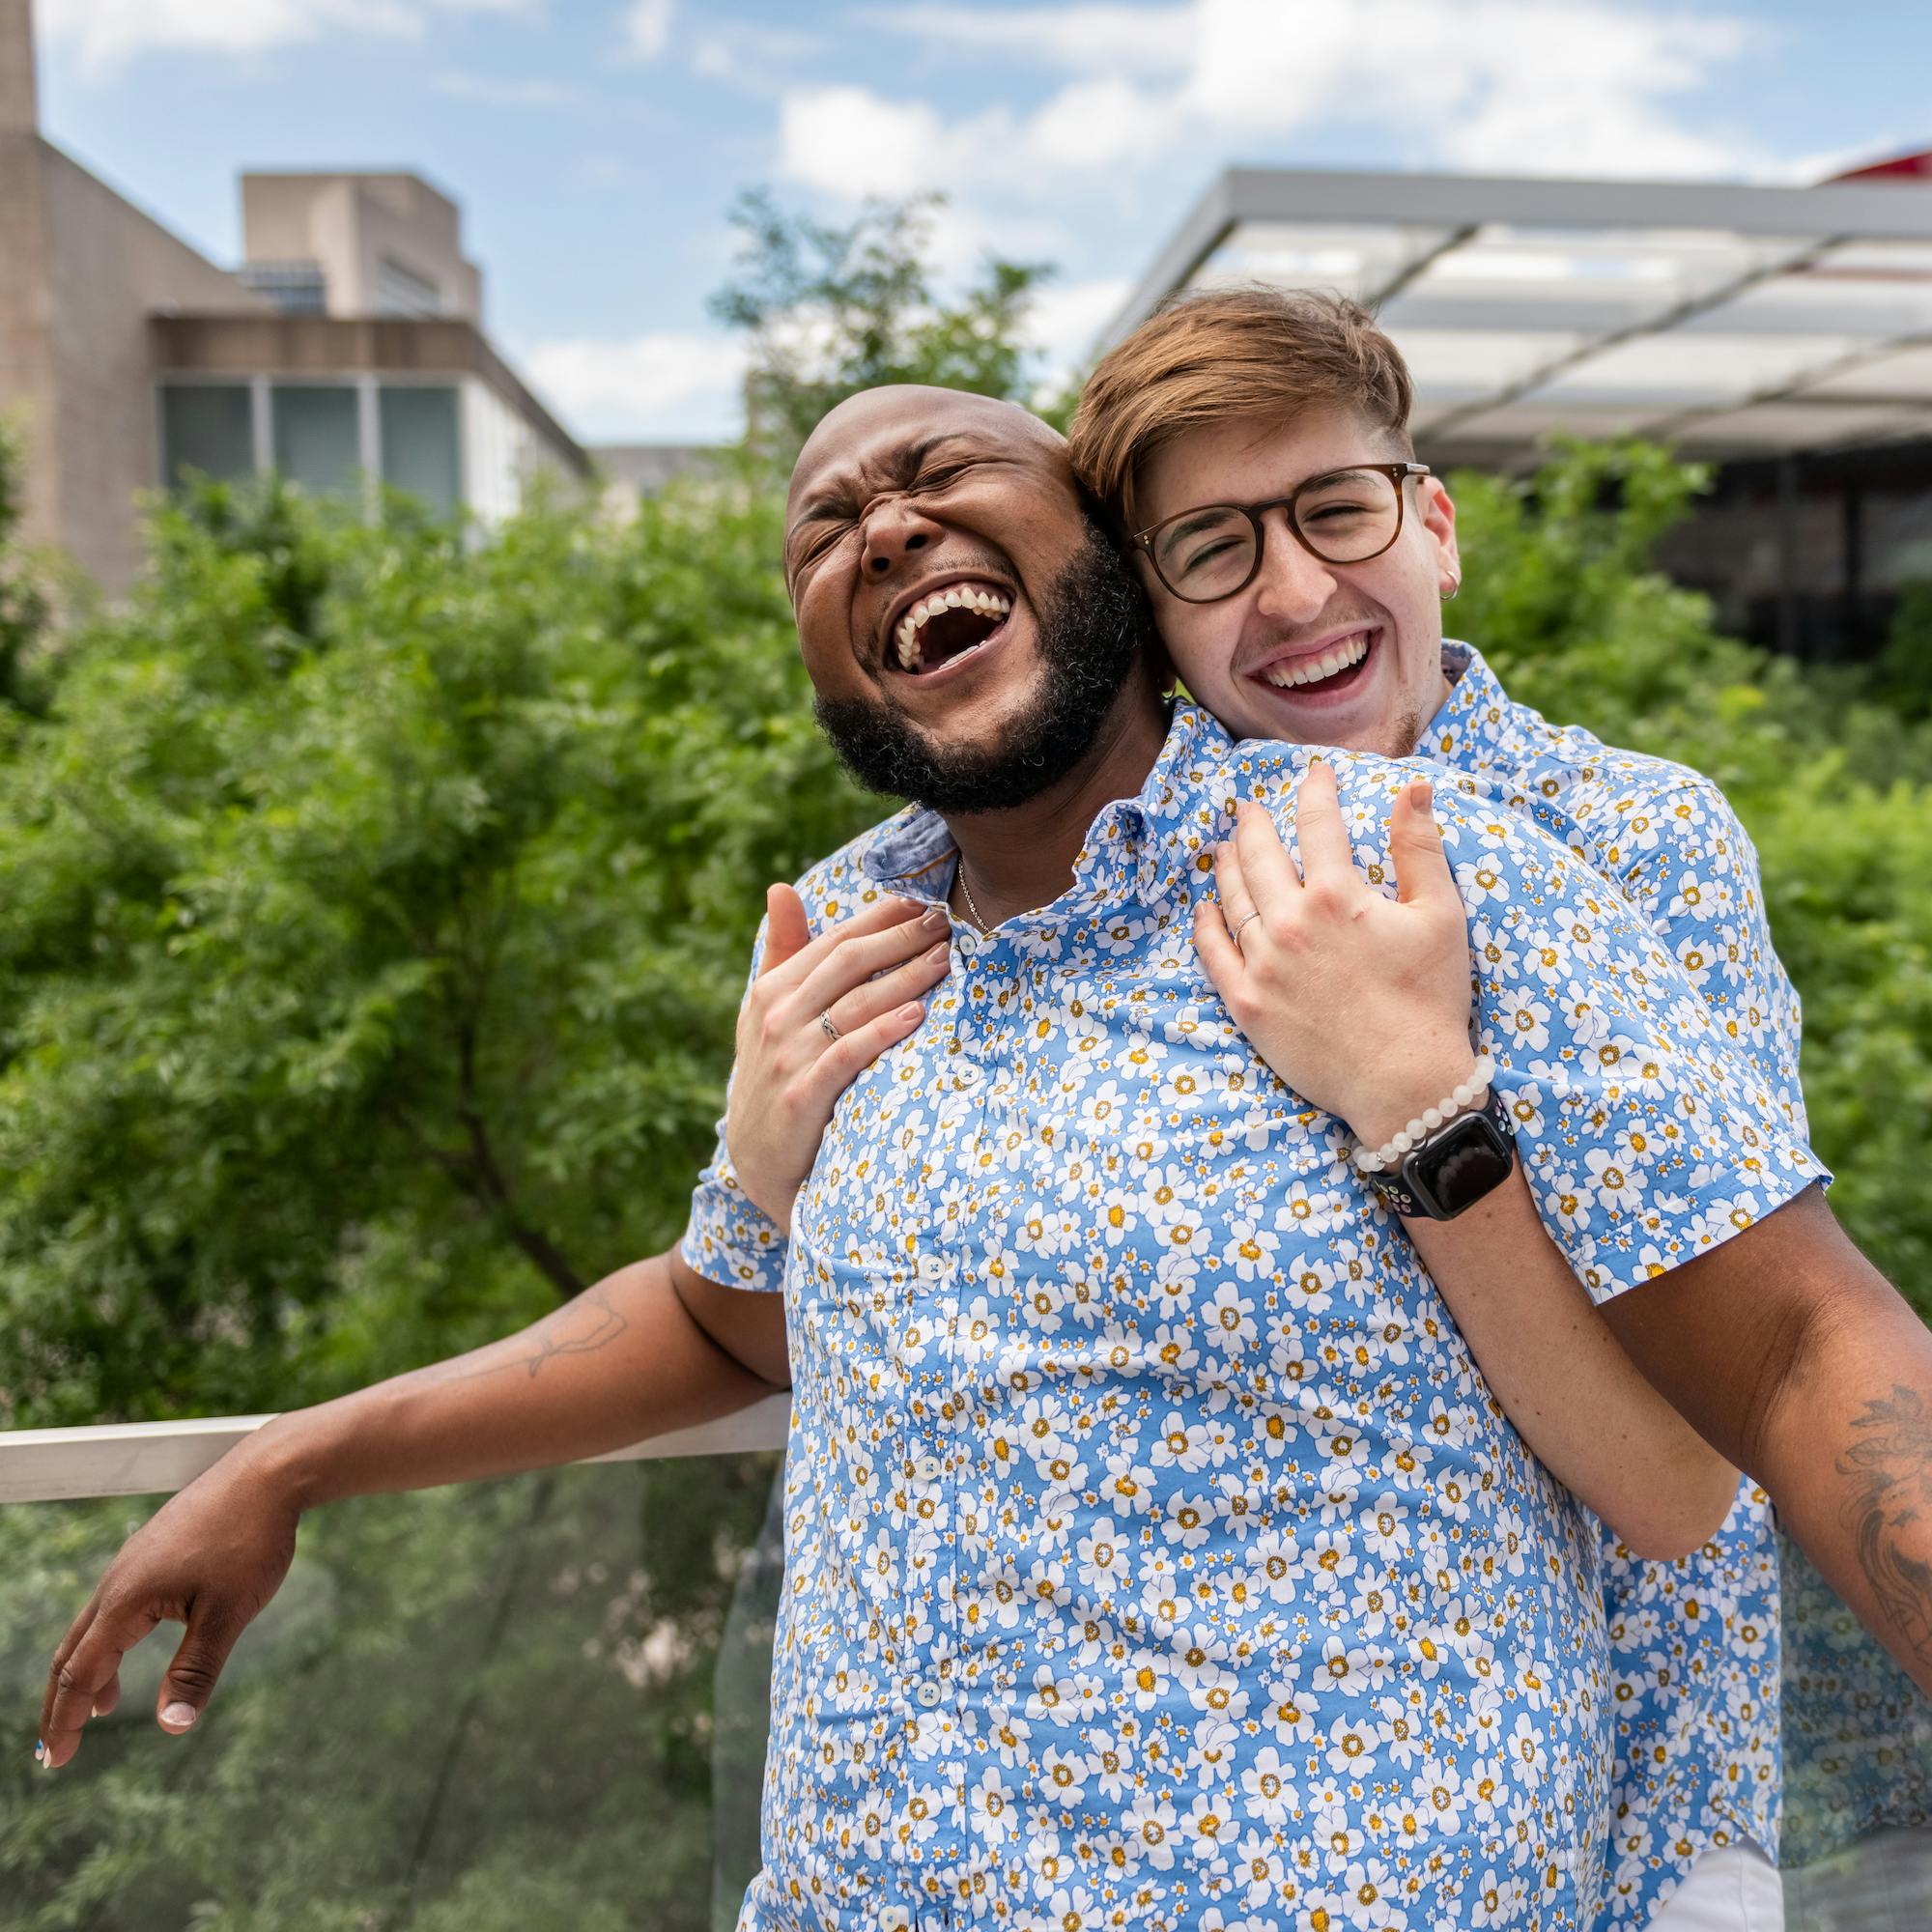 Two people laughing and embracing in a friendly gesture, both wearing similar floral shirts.